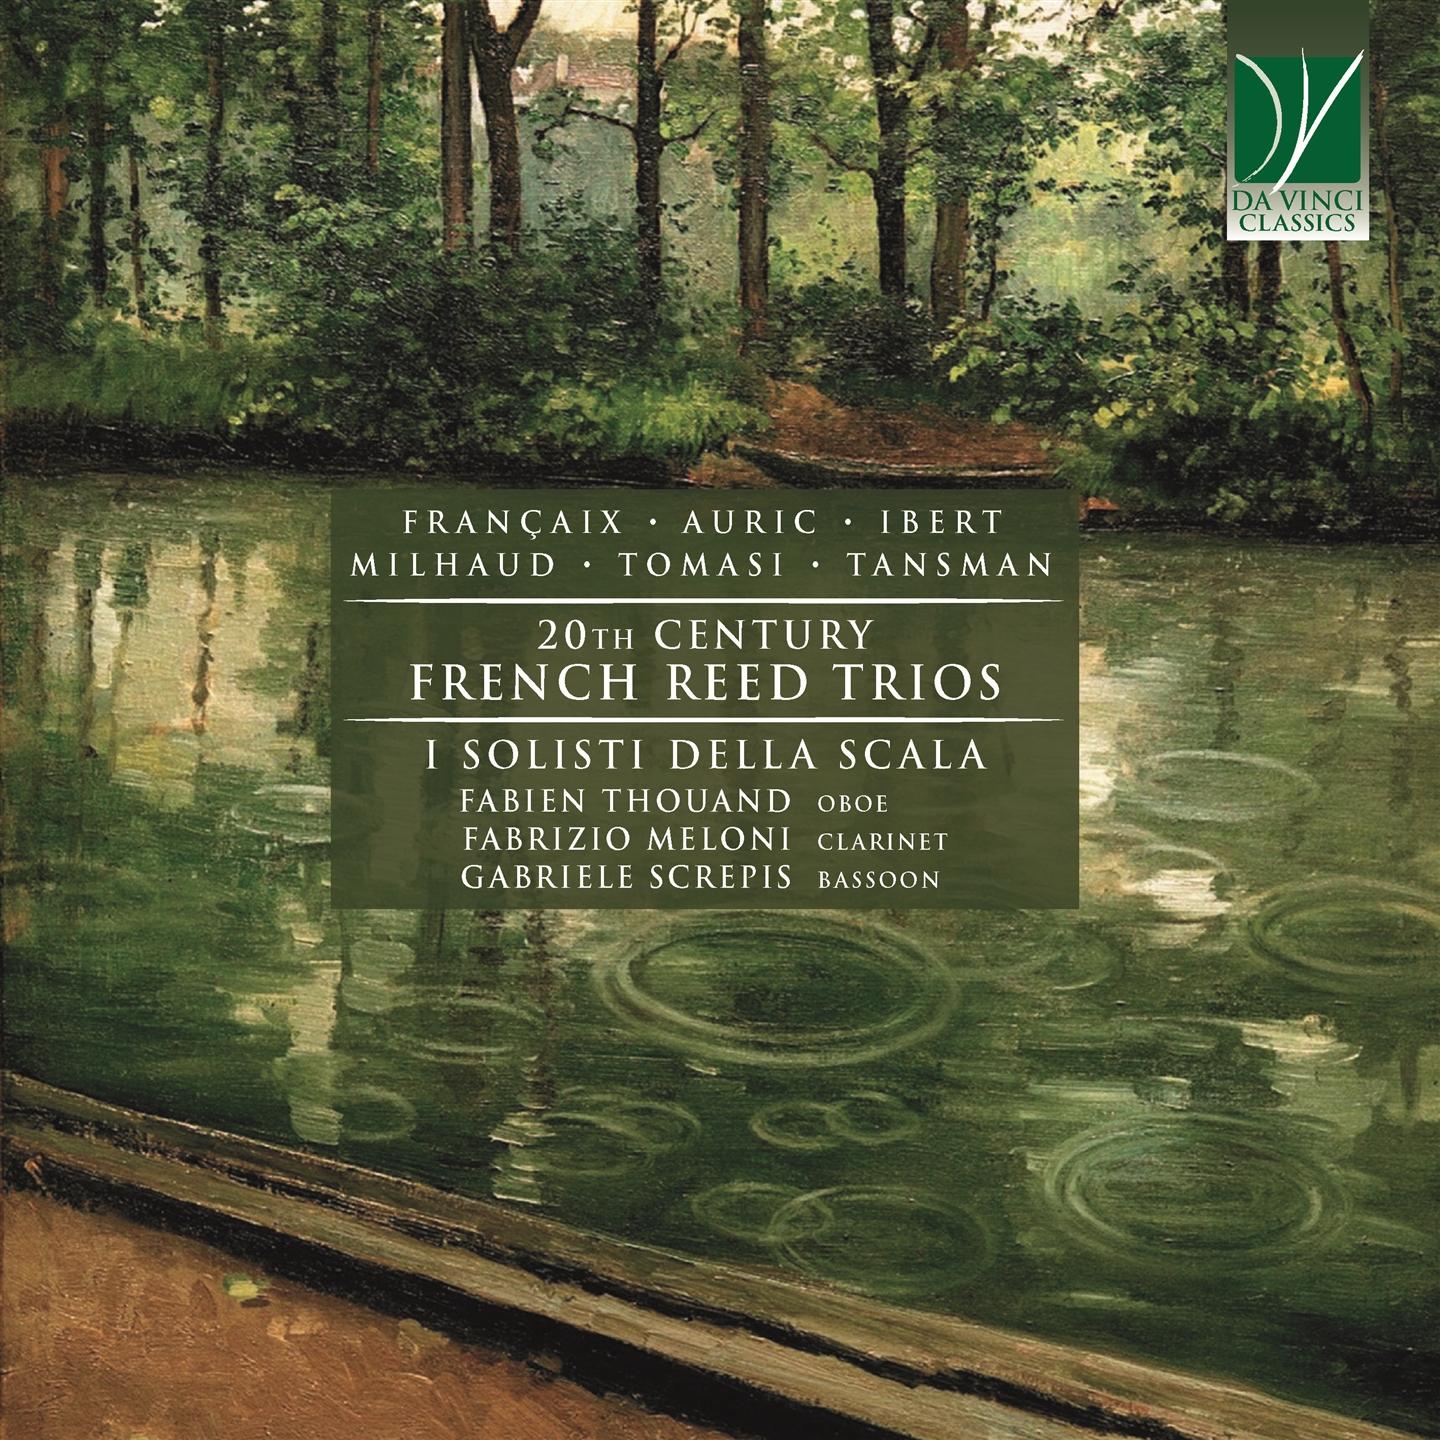 20TH CENTURY FRENCH REED TRIOS